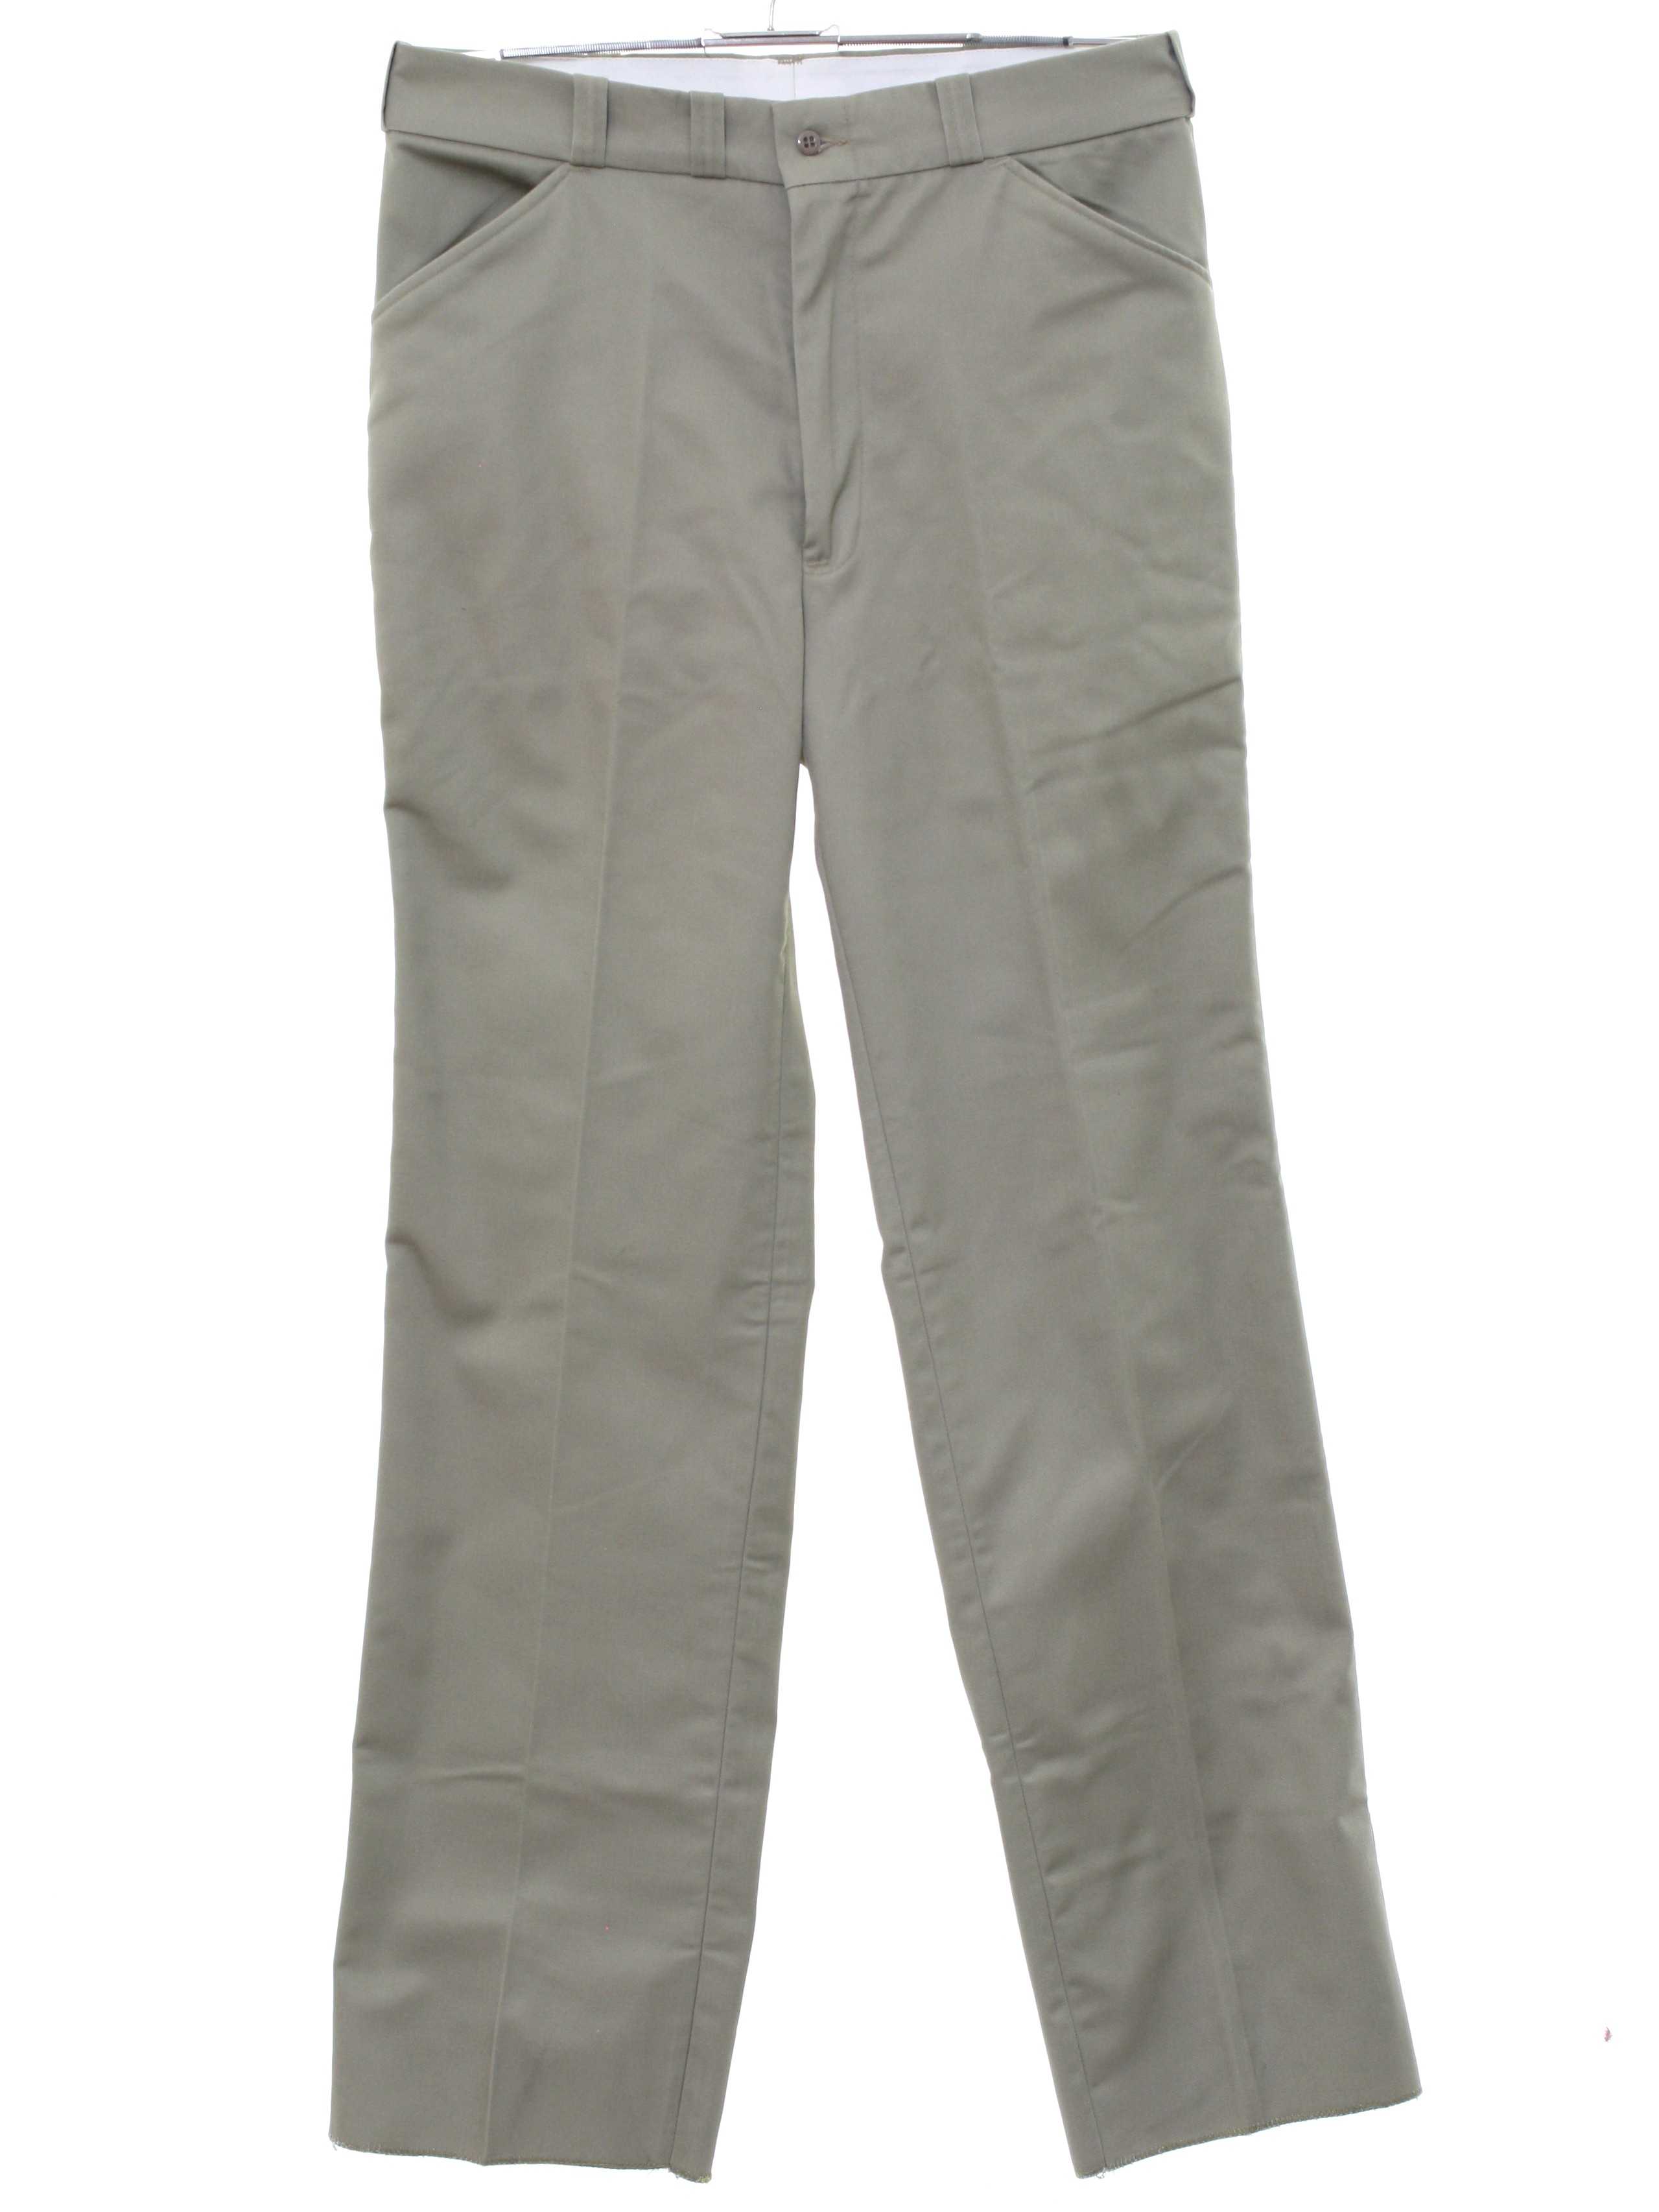 80s Pants (Made in USA): 80s -Made in USA- Mens tan cotton acrylic ...